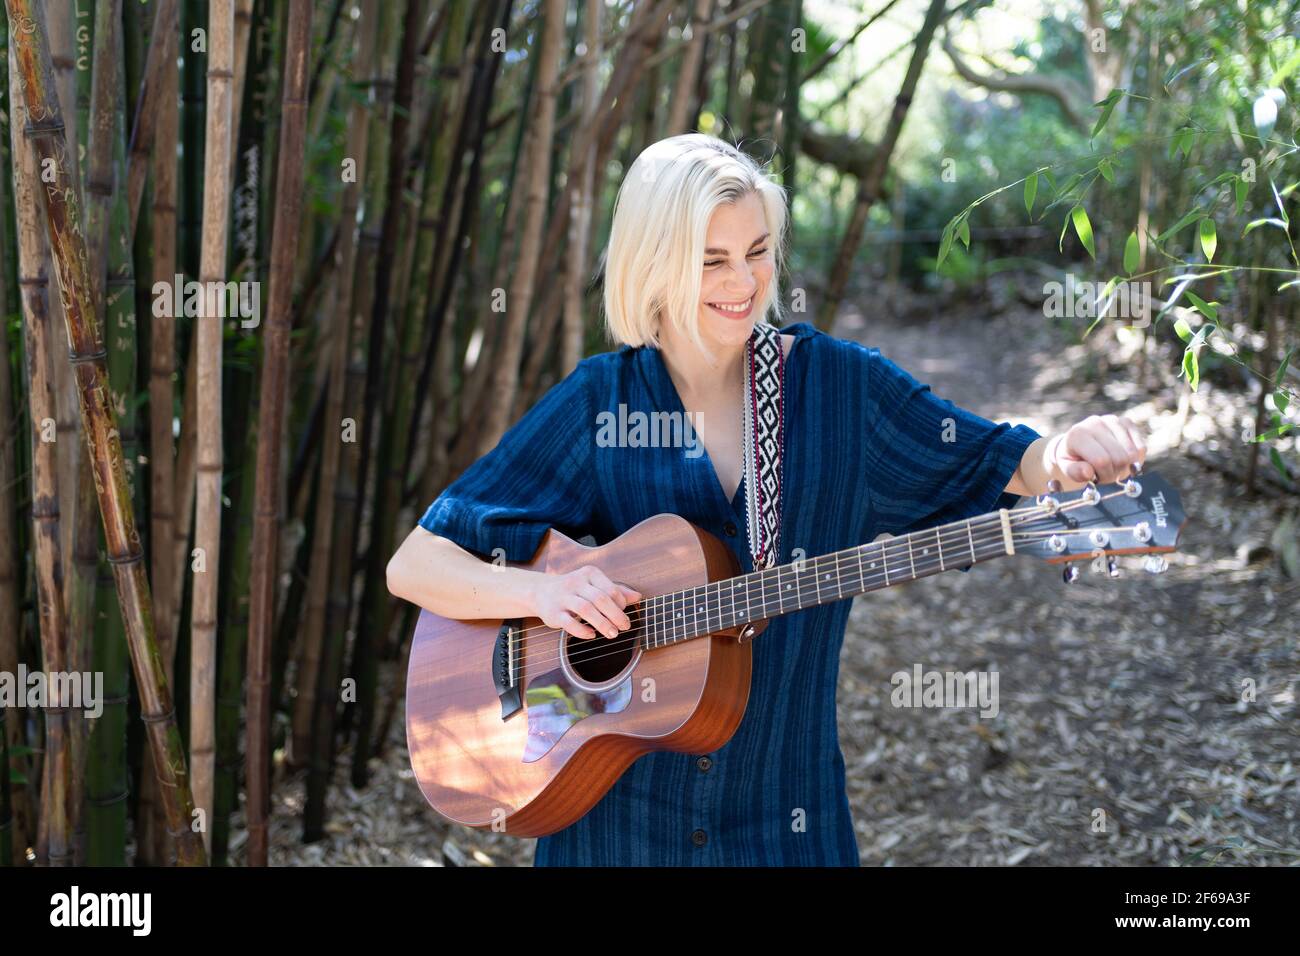 young woman playing guitar and singing in bamboo forest garden Stock Photo